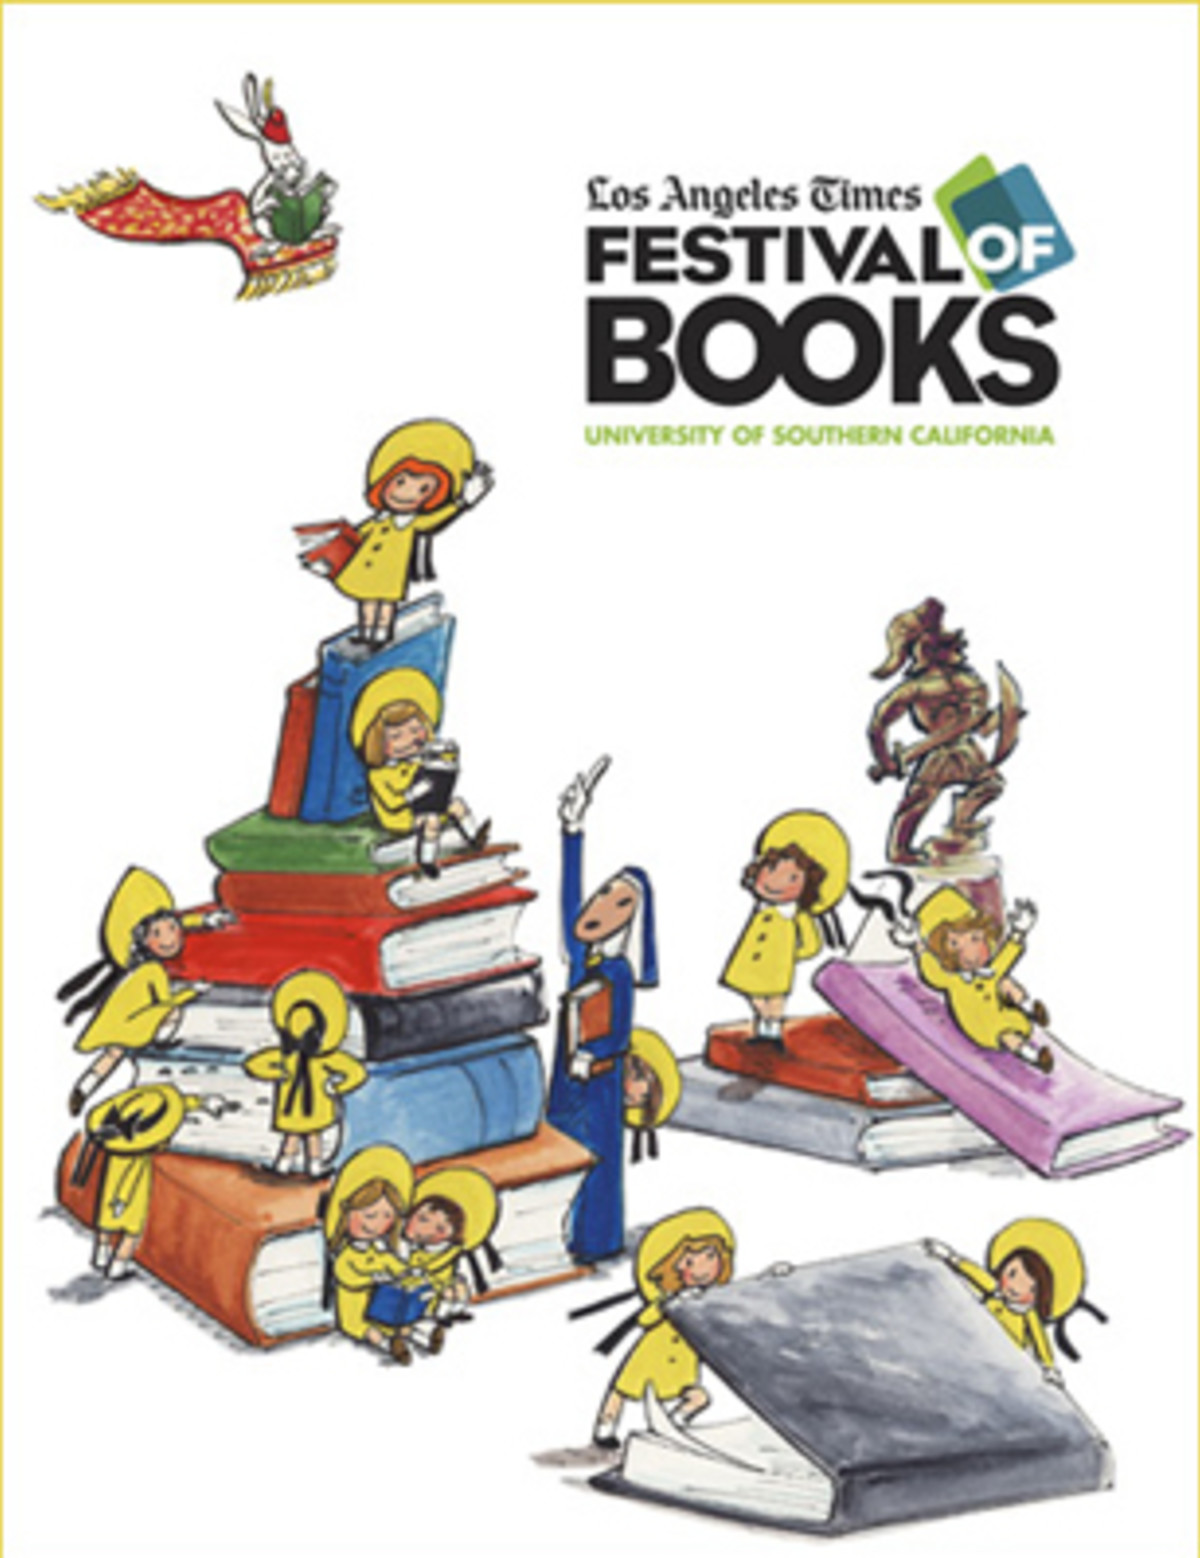 Los Angeles Times Festival of Books Begins Saturday (4/30) Complex